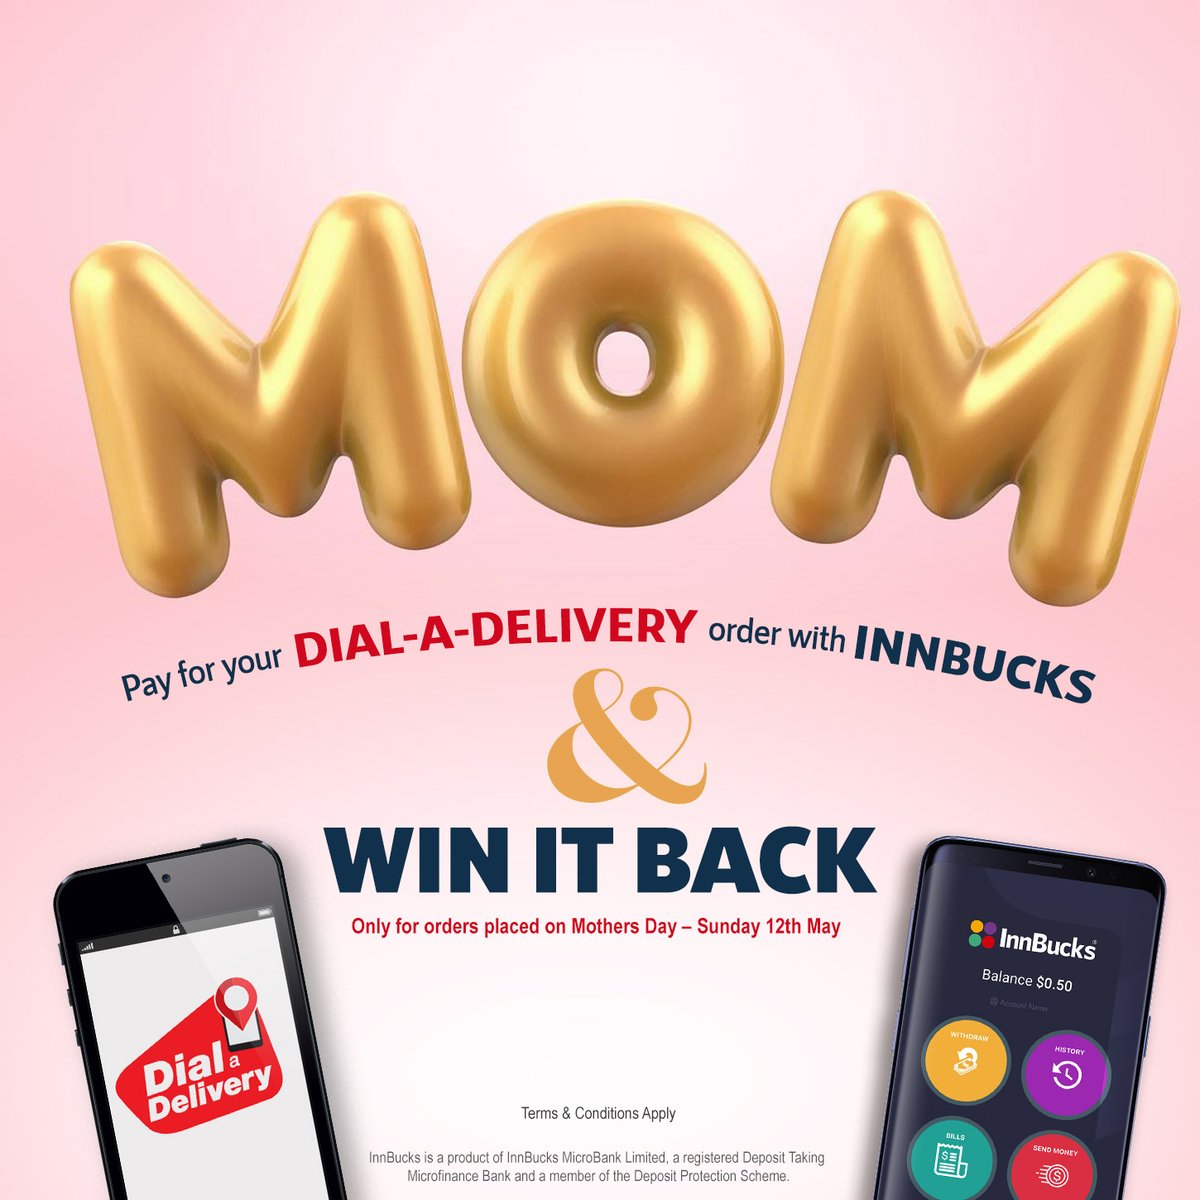 This Mother's Day, show Mom some extra love with @DialADeliveryZW! Order your food on Sunday the 12th of May, pay with #InnBucks and stand a chance to WIN your money back! Get ready to spoil Mom like never before! Terms & Conditions Apply.